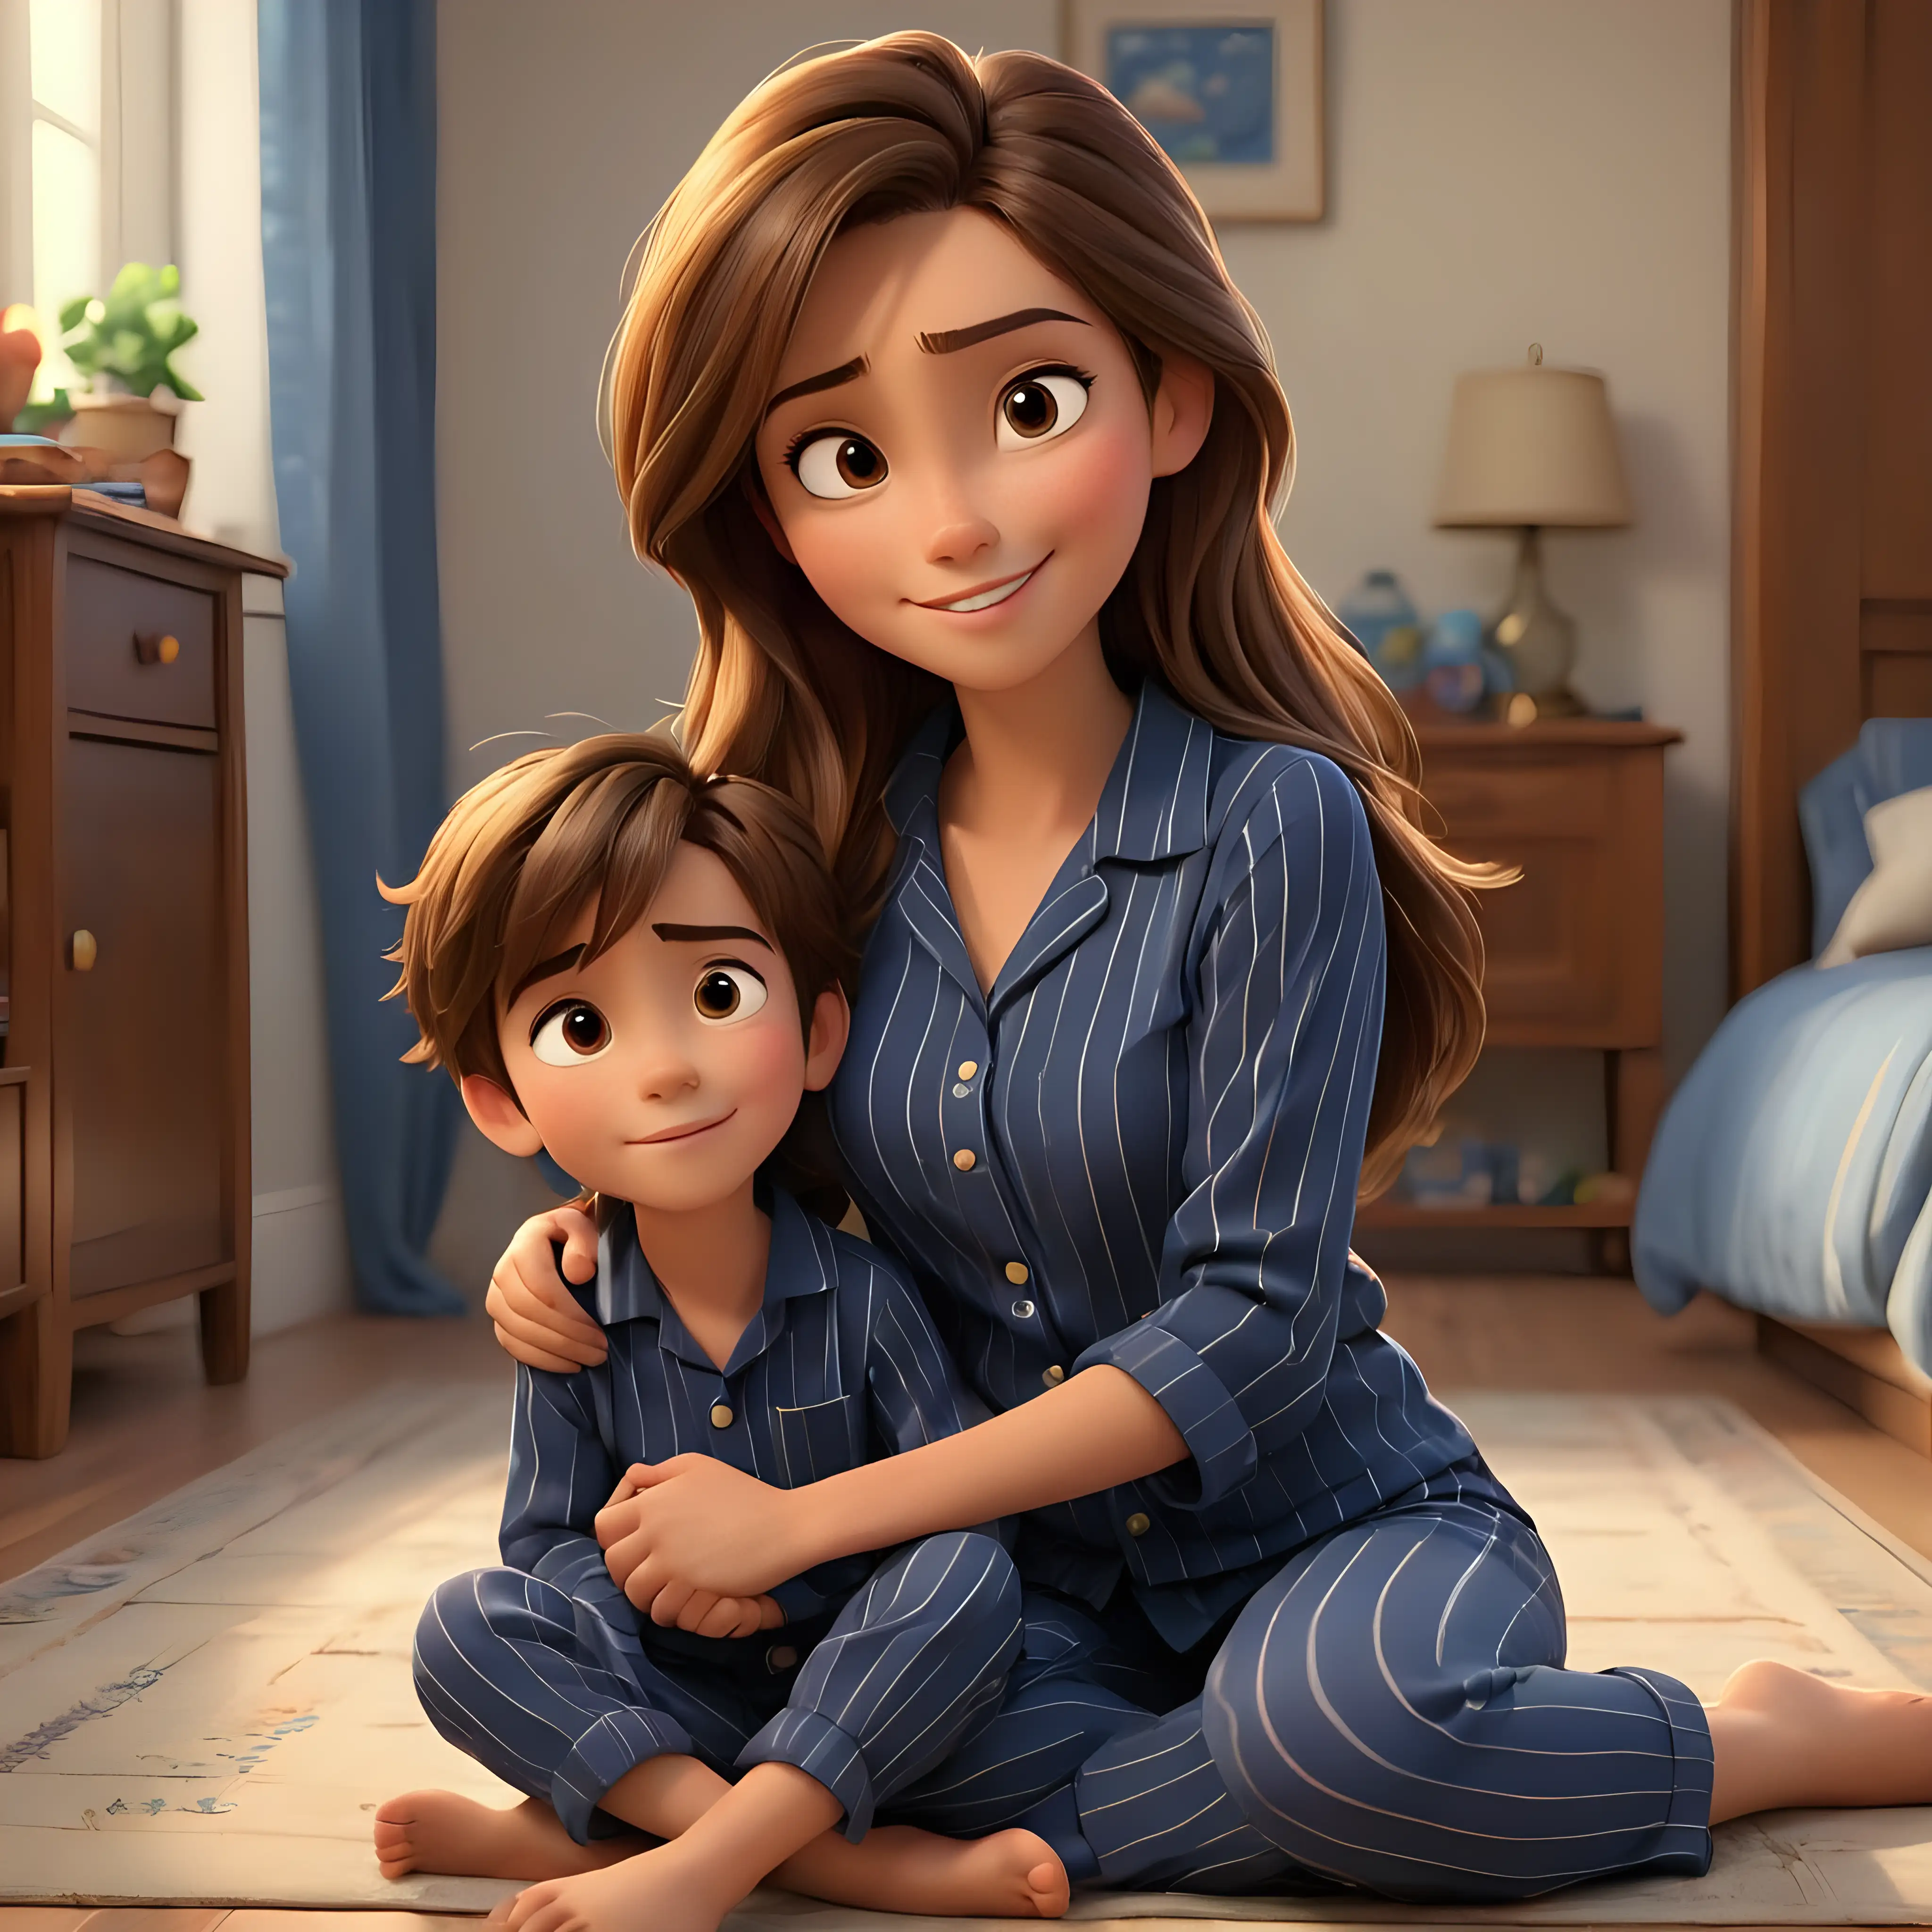 Disney pixar theme, 3d animation, beautiful mom, long straight brown hair and brown eyes, son with neat brown hair and brown eyes, mom and son looking at each other hugging, sitting happily on floor, wearing navy blue stripe pajamas